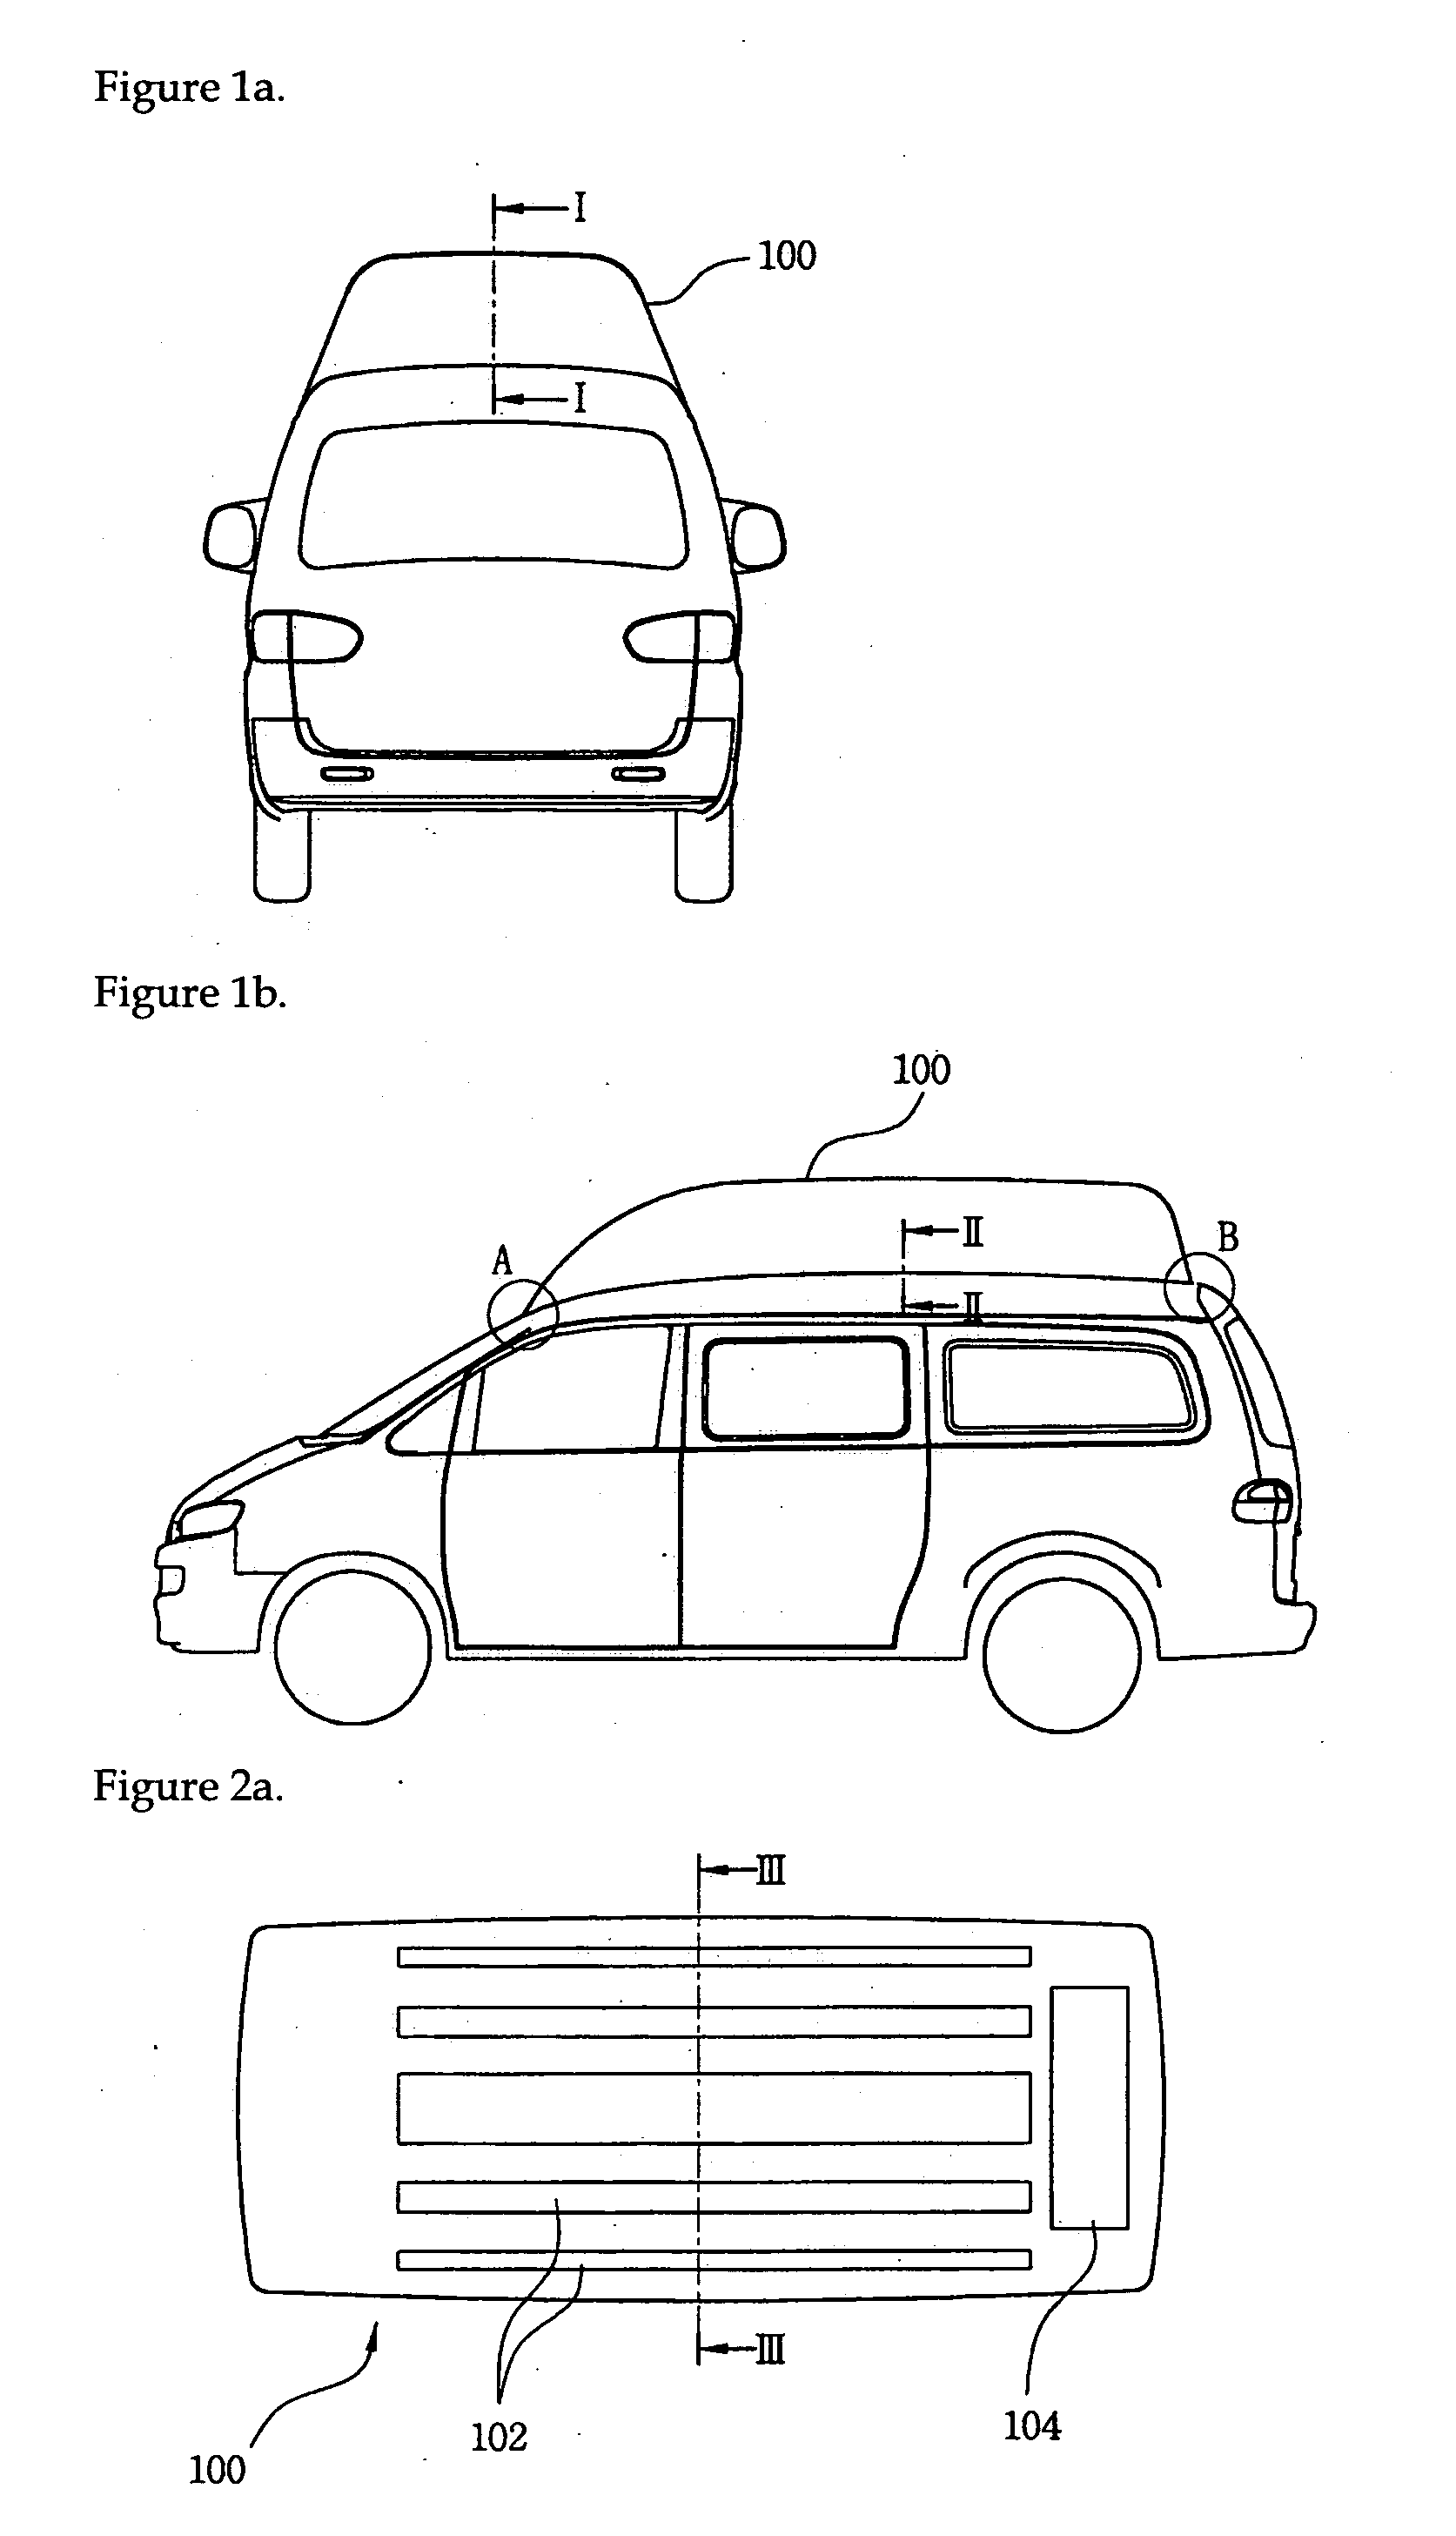 High roof structure of a vehicle